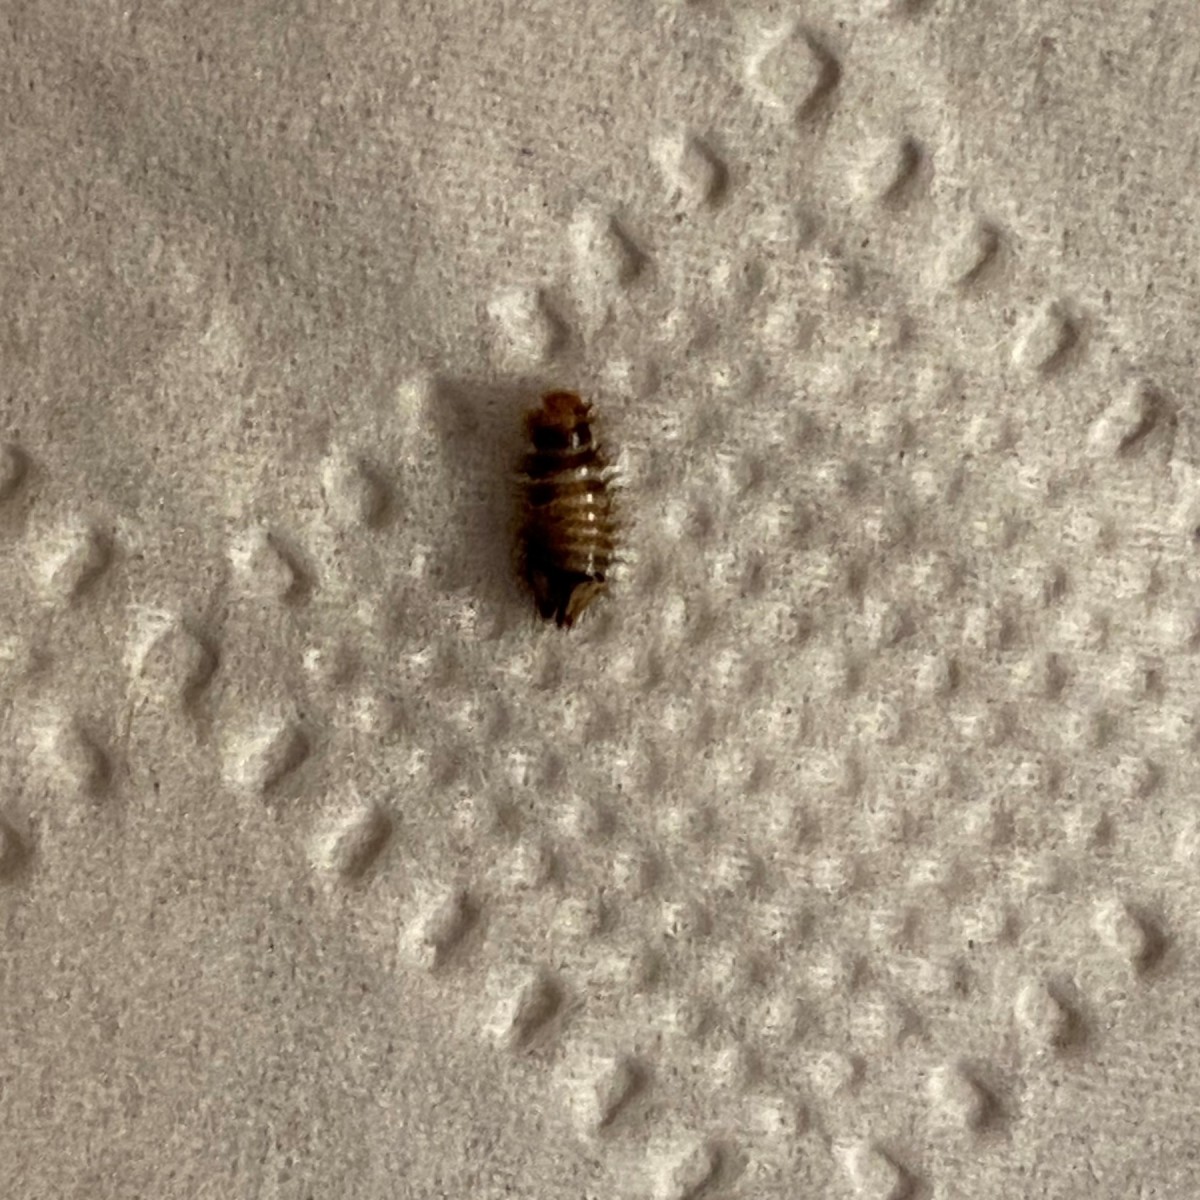 Is This a Bed Bug? | ThriftyFun